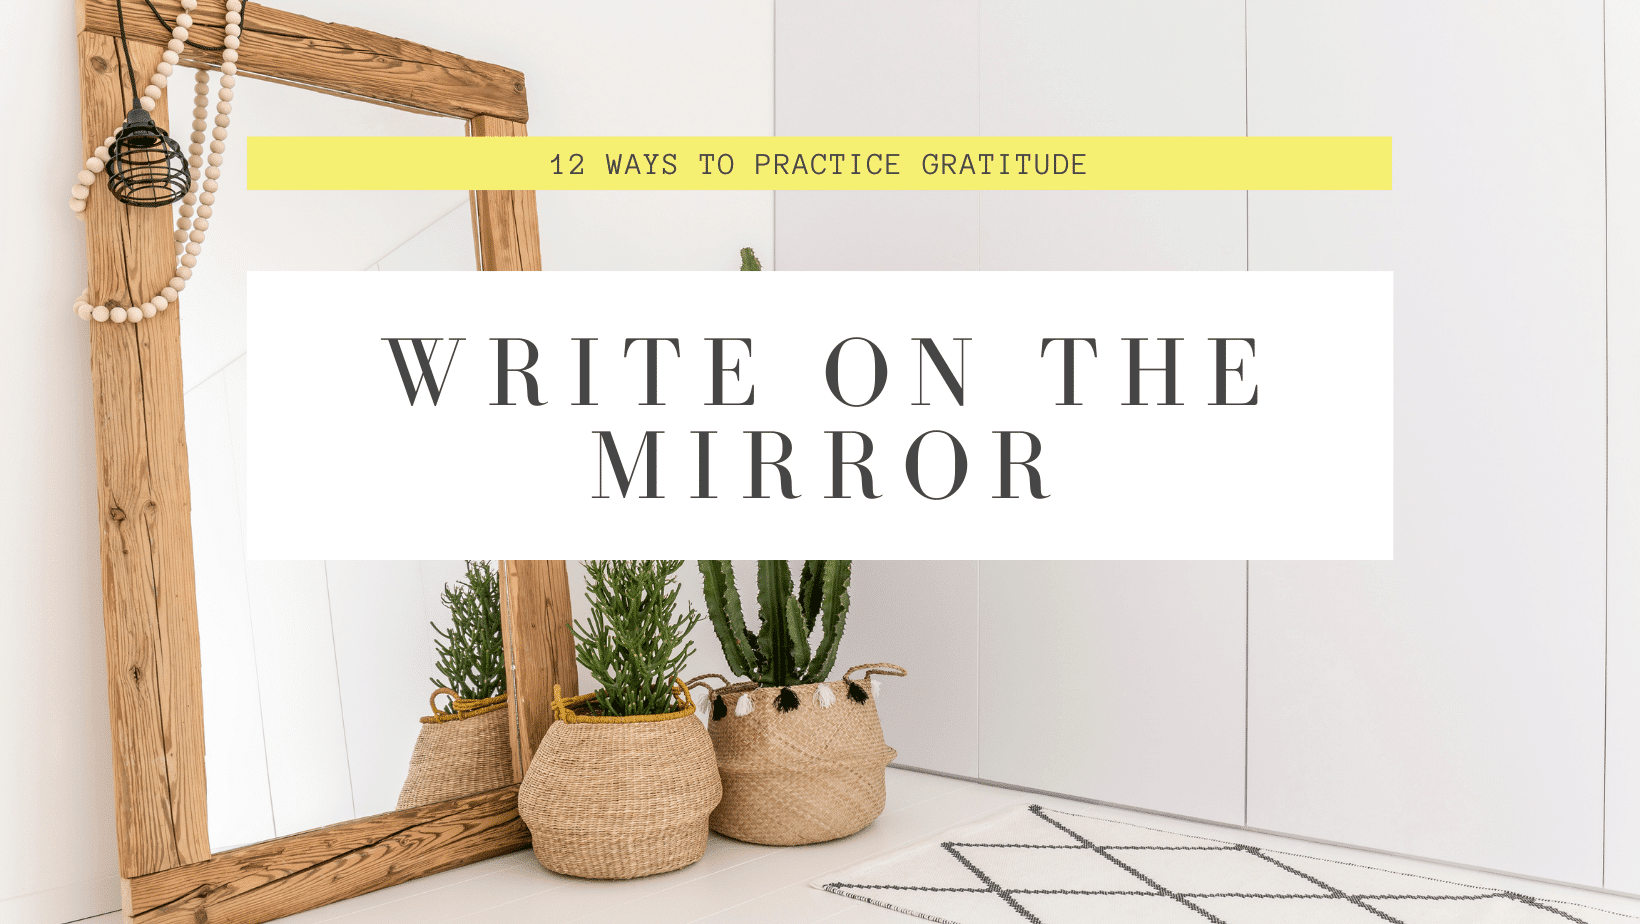 A mirror with cacti nearby as a metaphor for finding gratitude within yourself.